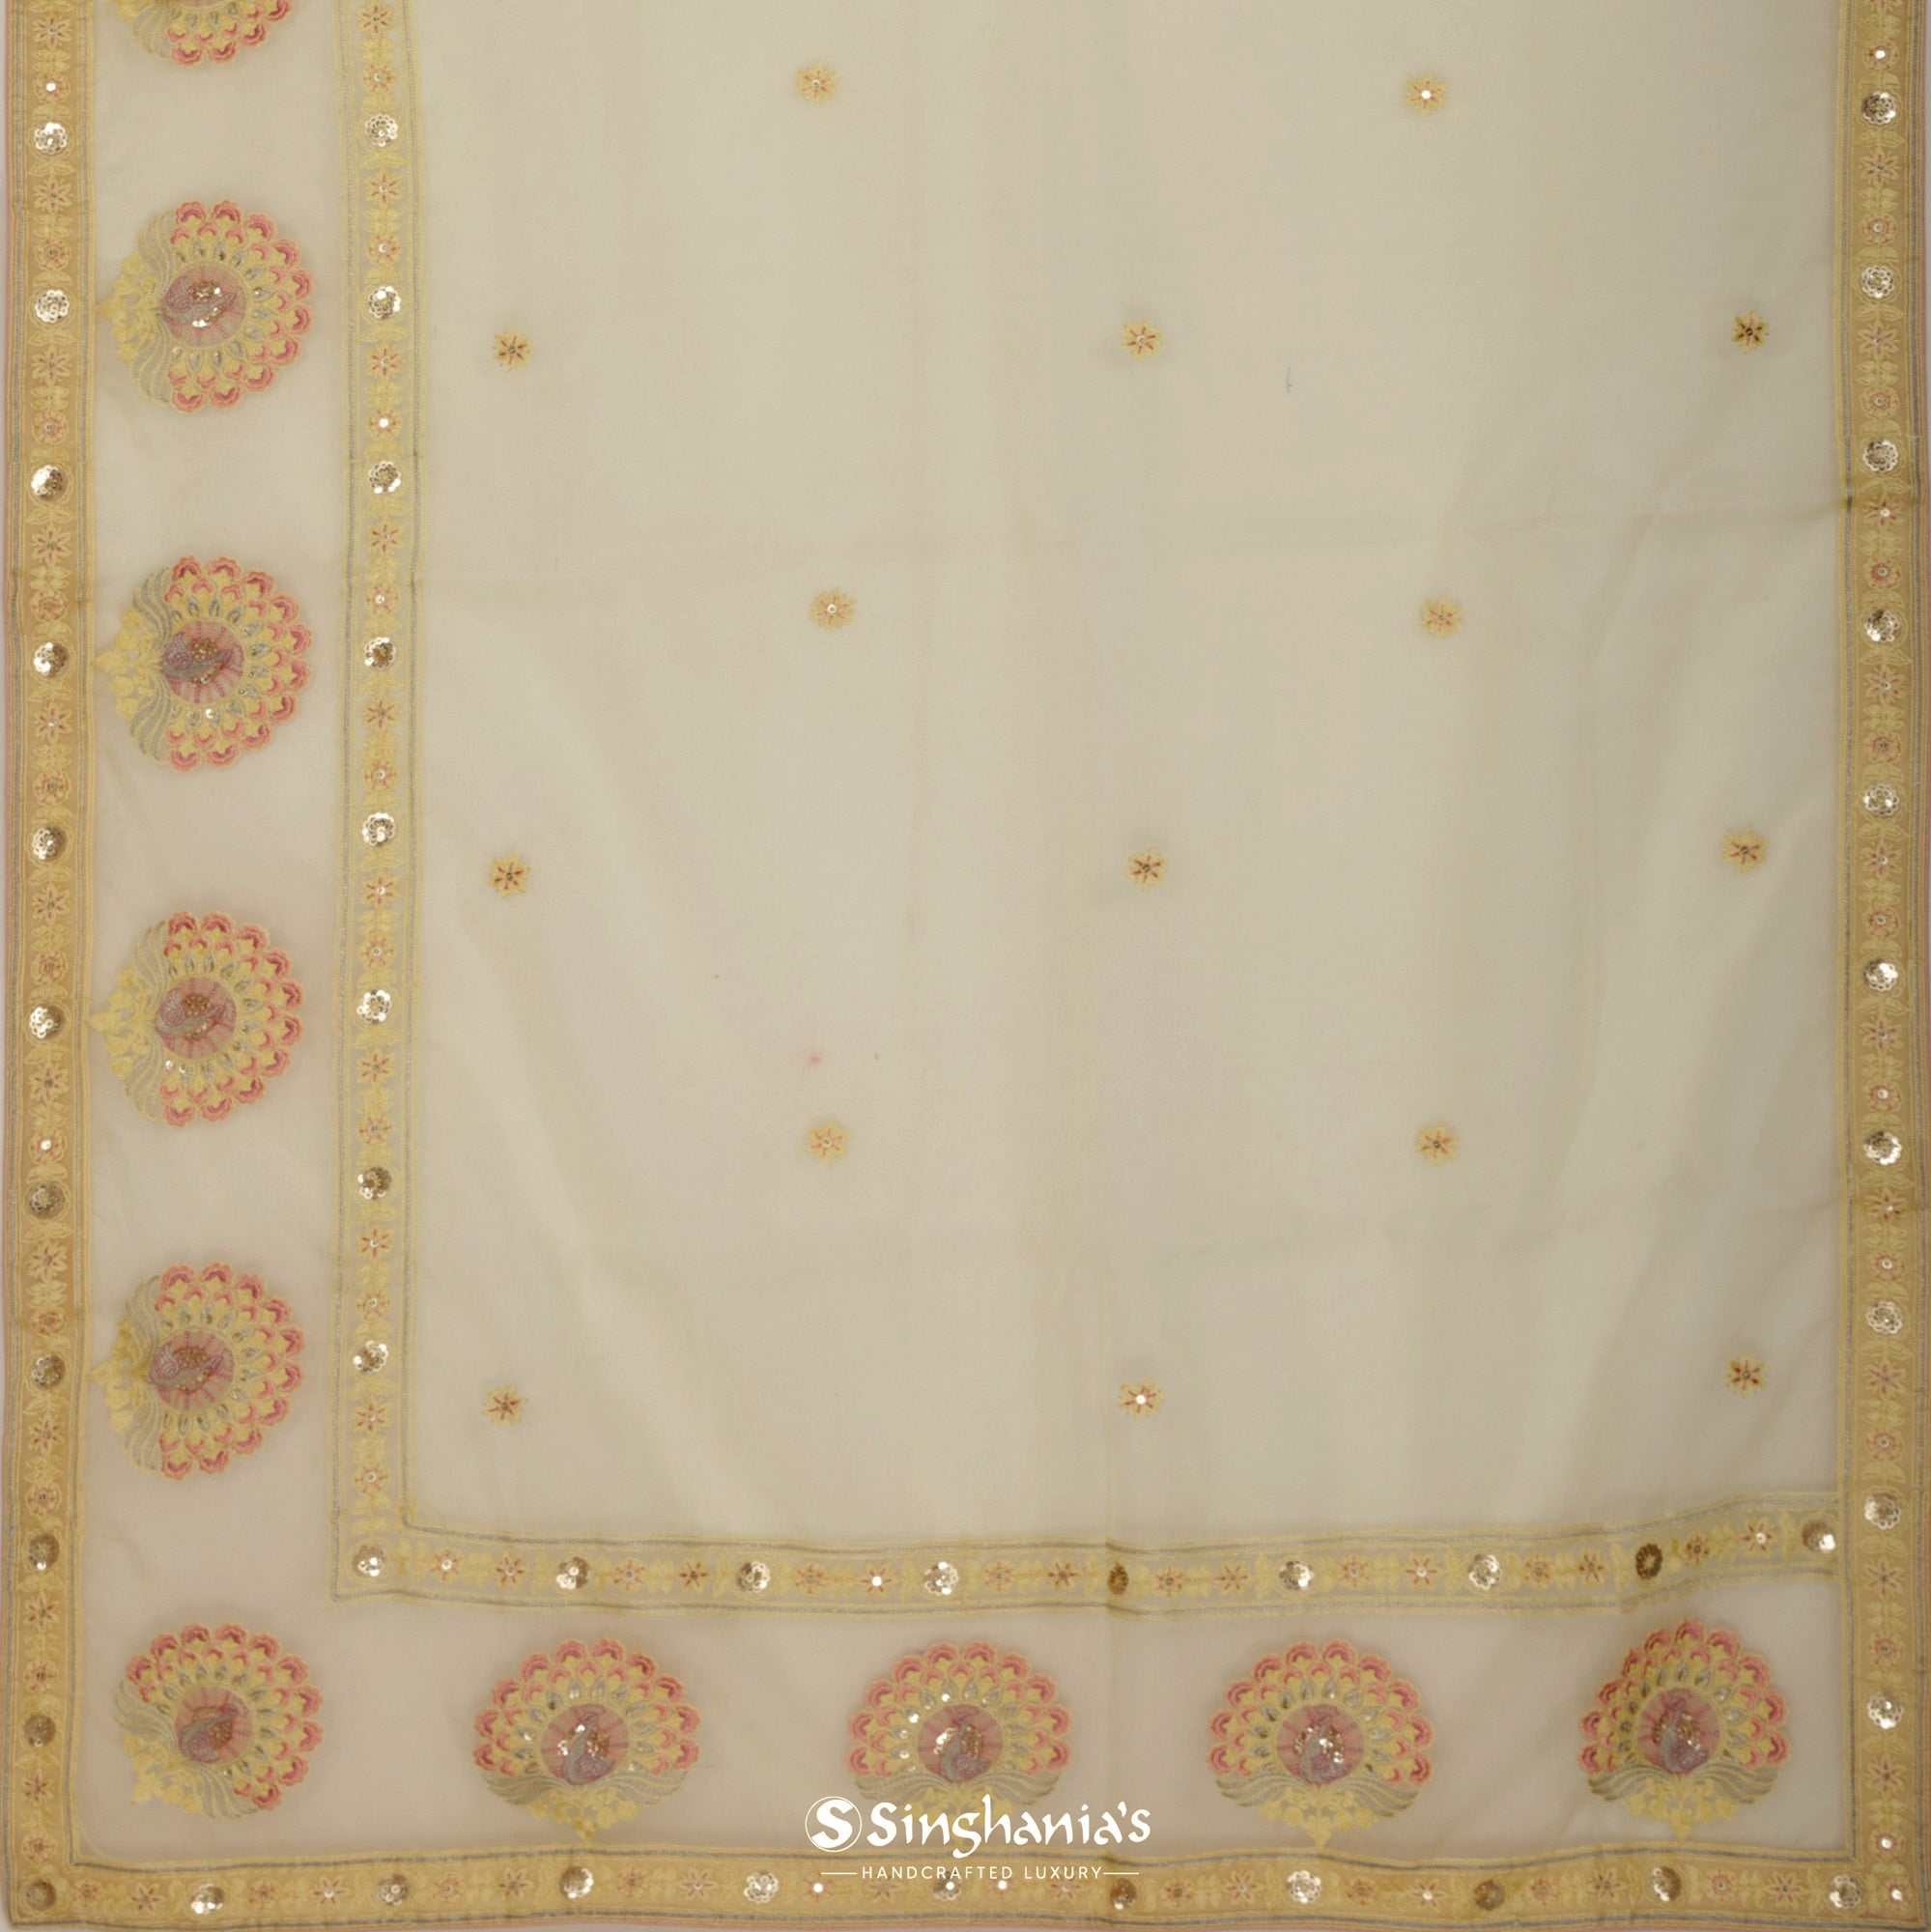 Vintage Yellow Organza Saree With Thread Embroidery